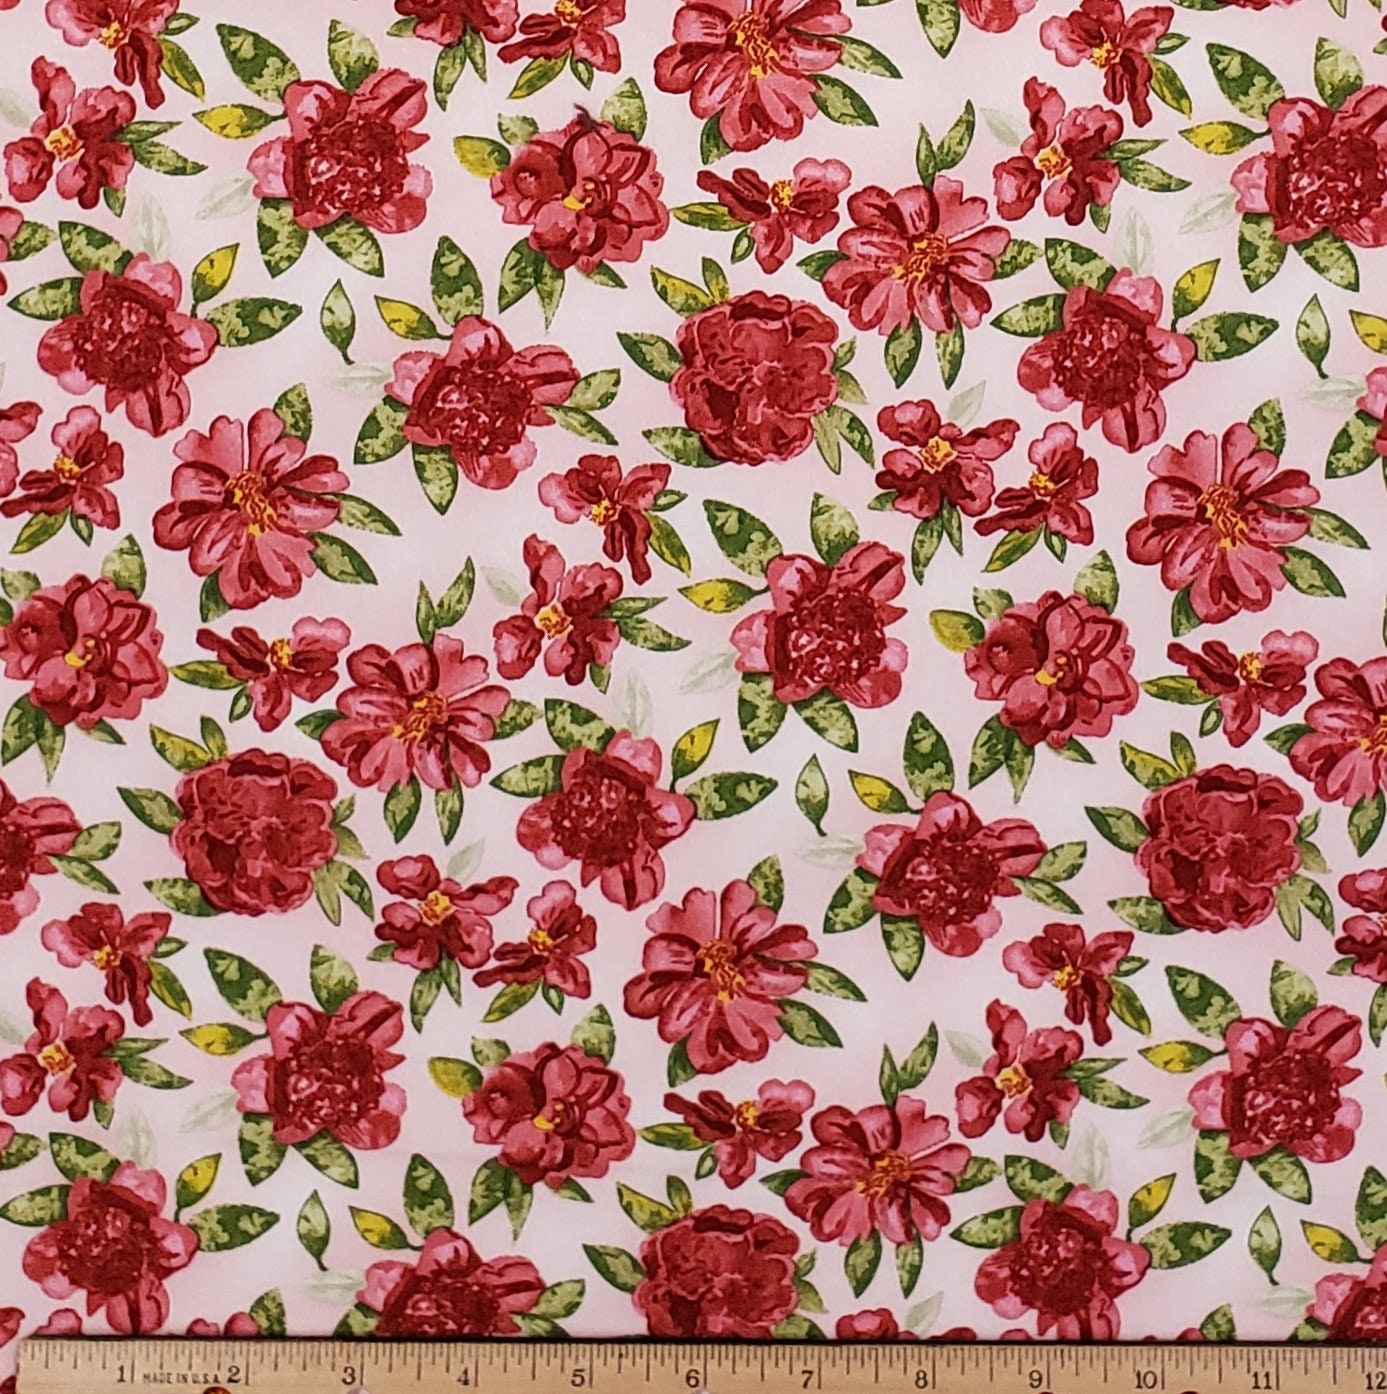 R.E.D. International Textiles CT04-853 - Pale Pink Fabric / Red Flower Print